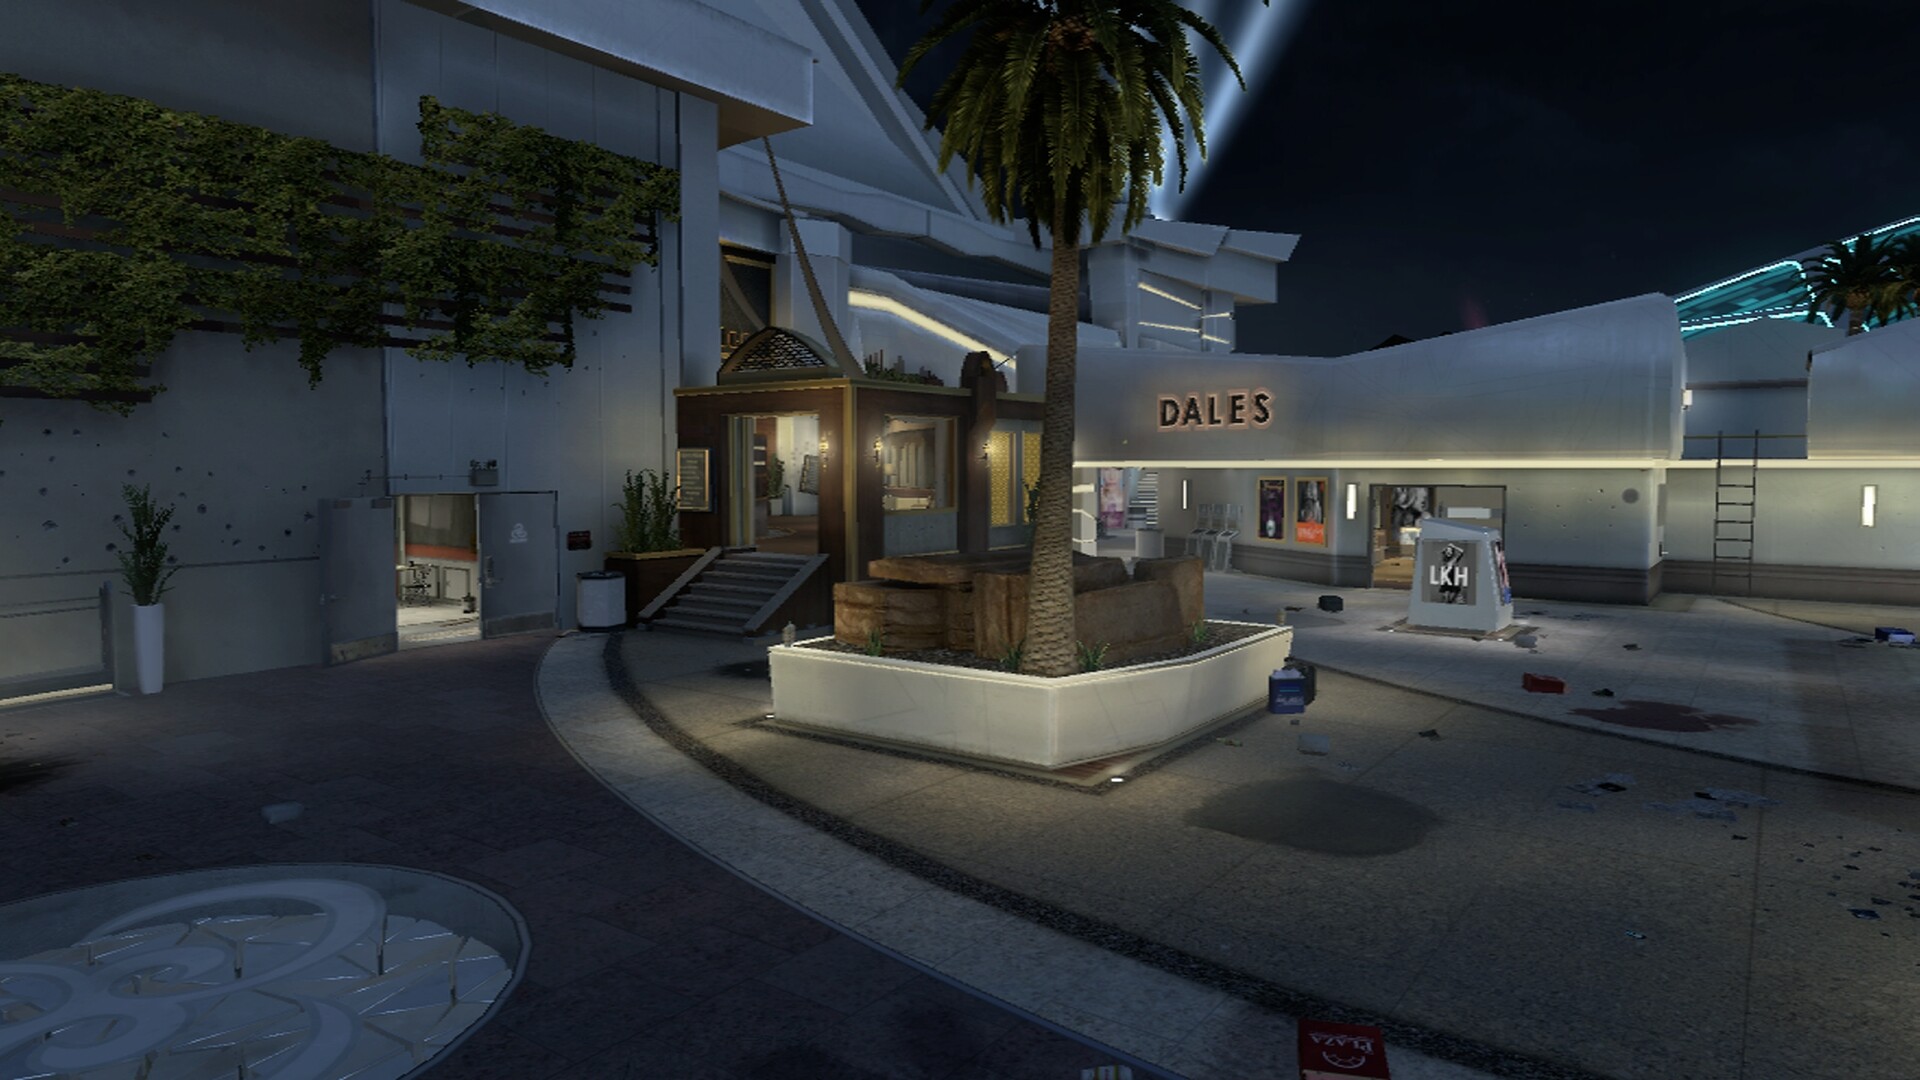 Call of Duty Black Ops 2 Map Strategies – Plaza